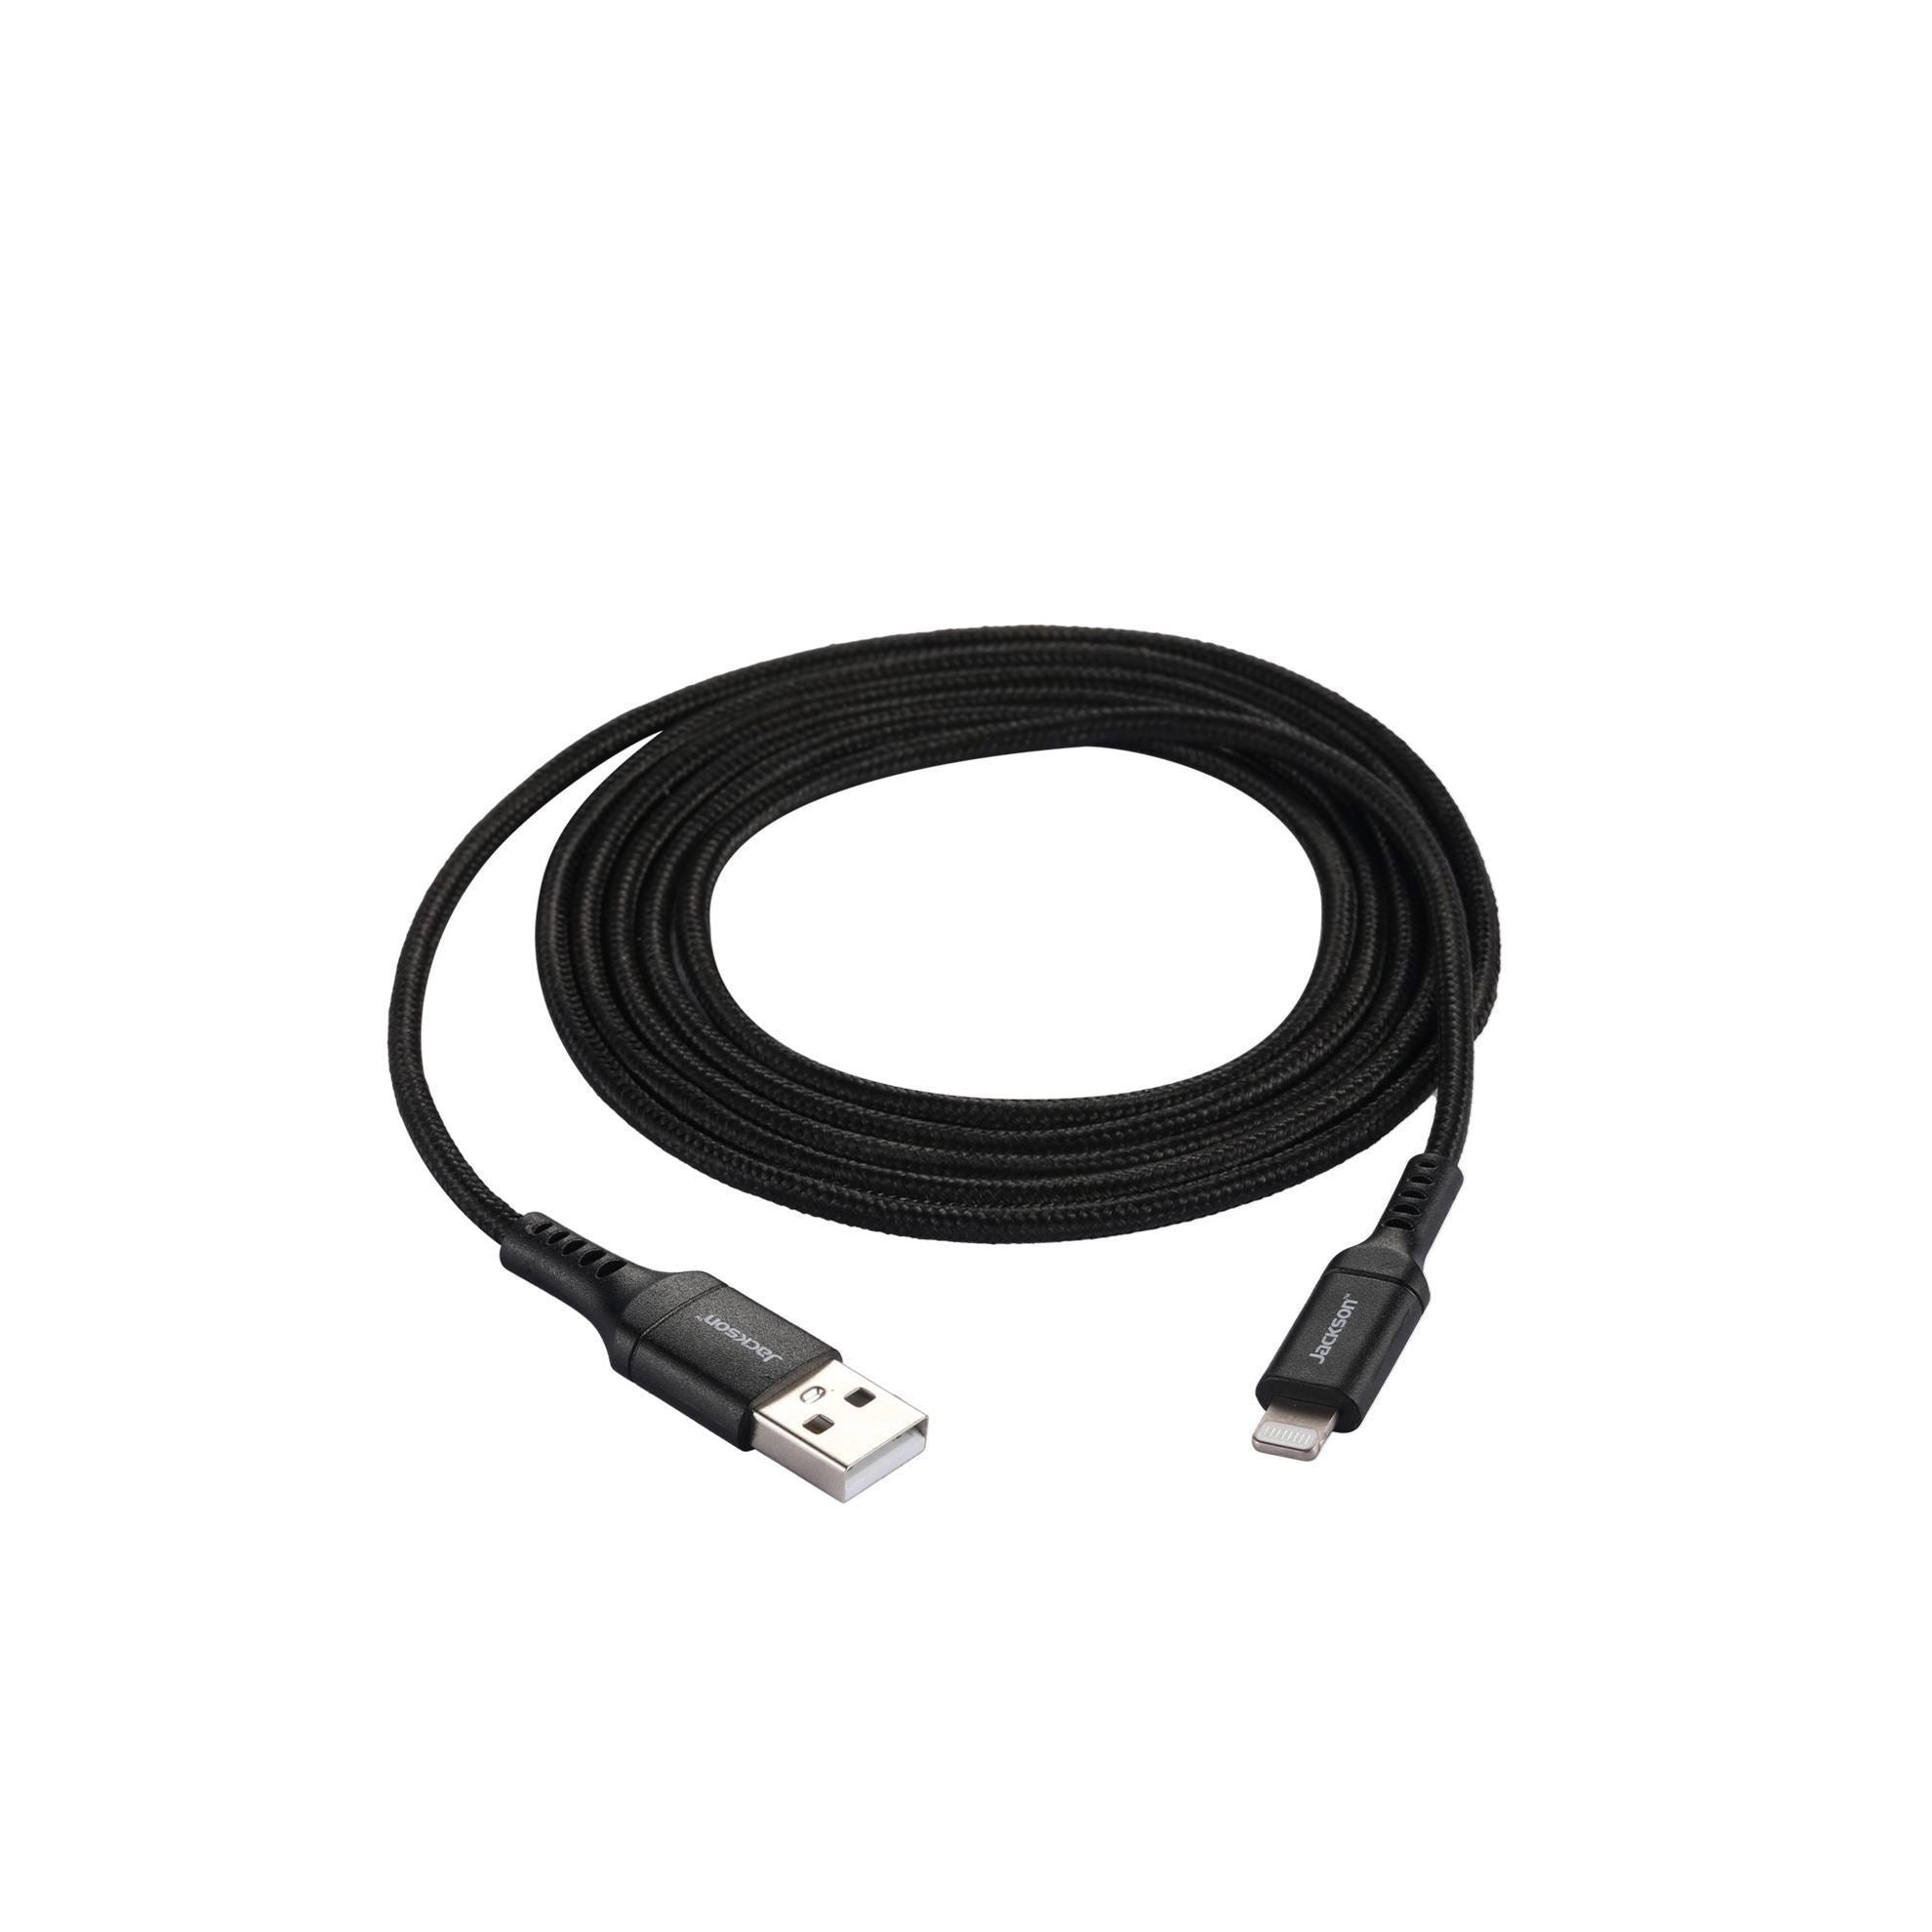 JACKSON_1.5m_MFI_Certified_Apple_USB-A_to_Lightning_Data_and_Charge_Cable._Charge_and_Sync_iPhone,_iPad_or_iPod._Braided_Cable_to_Provide_Extra_Durability. 152